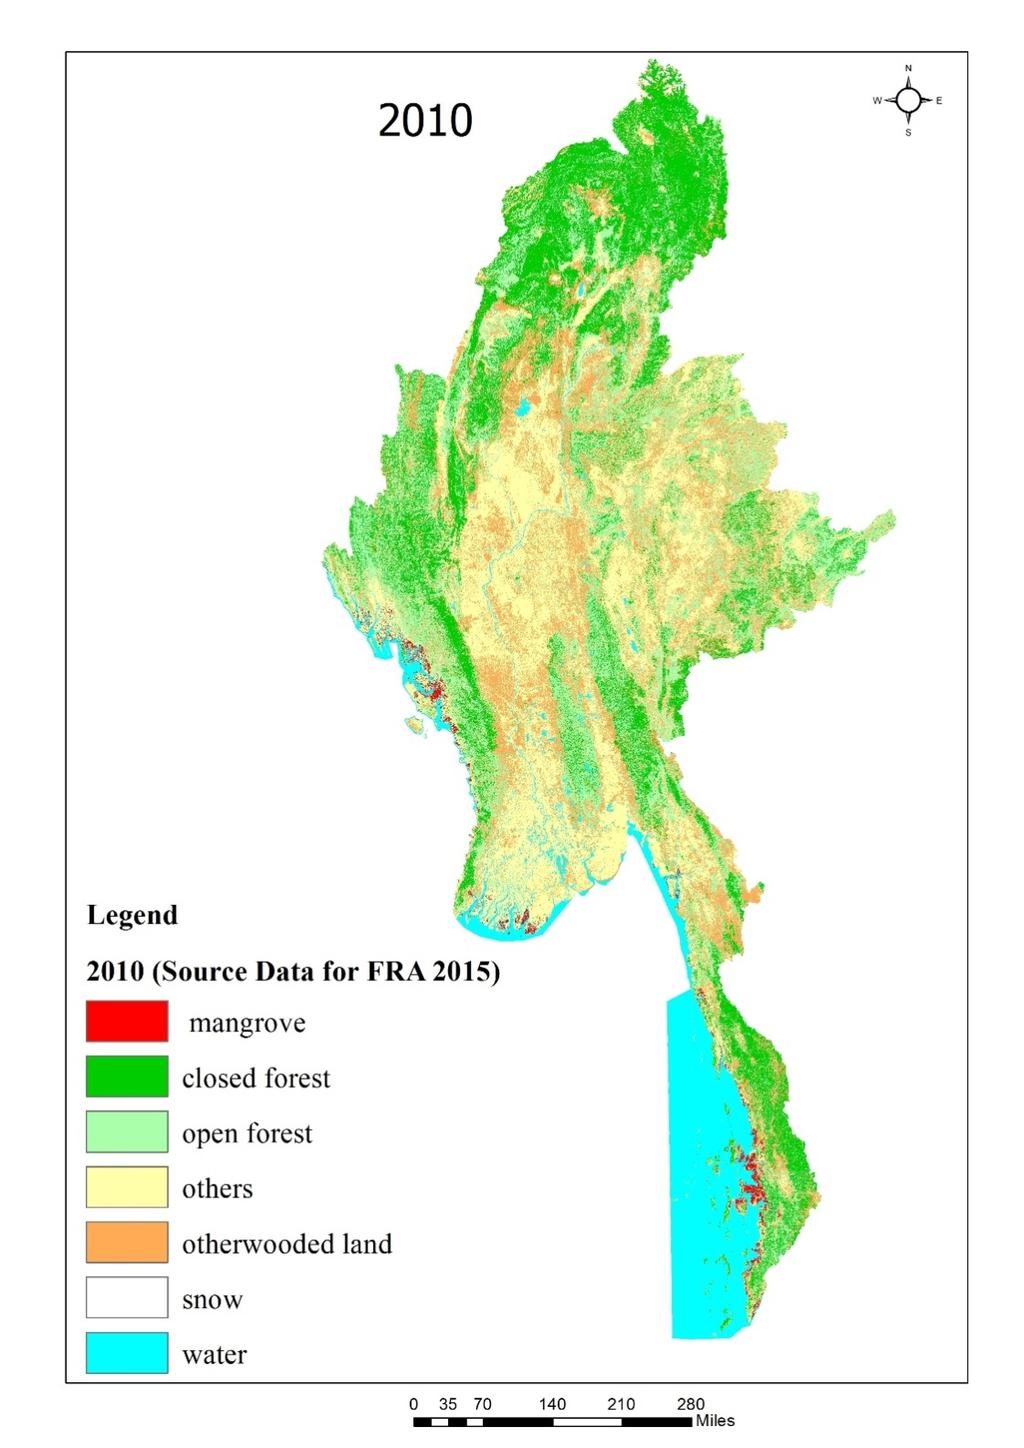 Reviewing on National Forest Cover Data Notes: Not